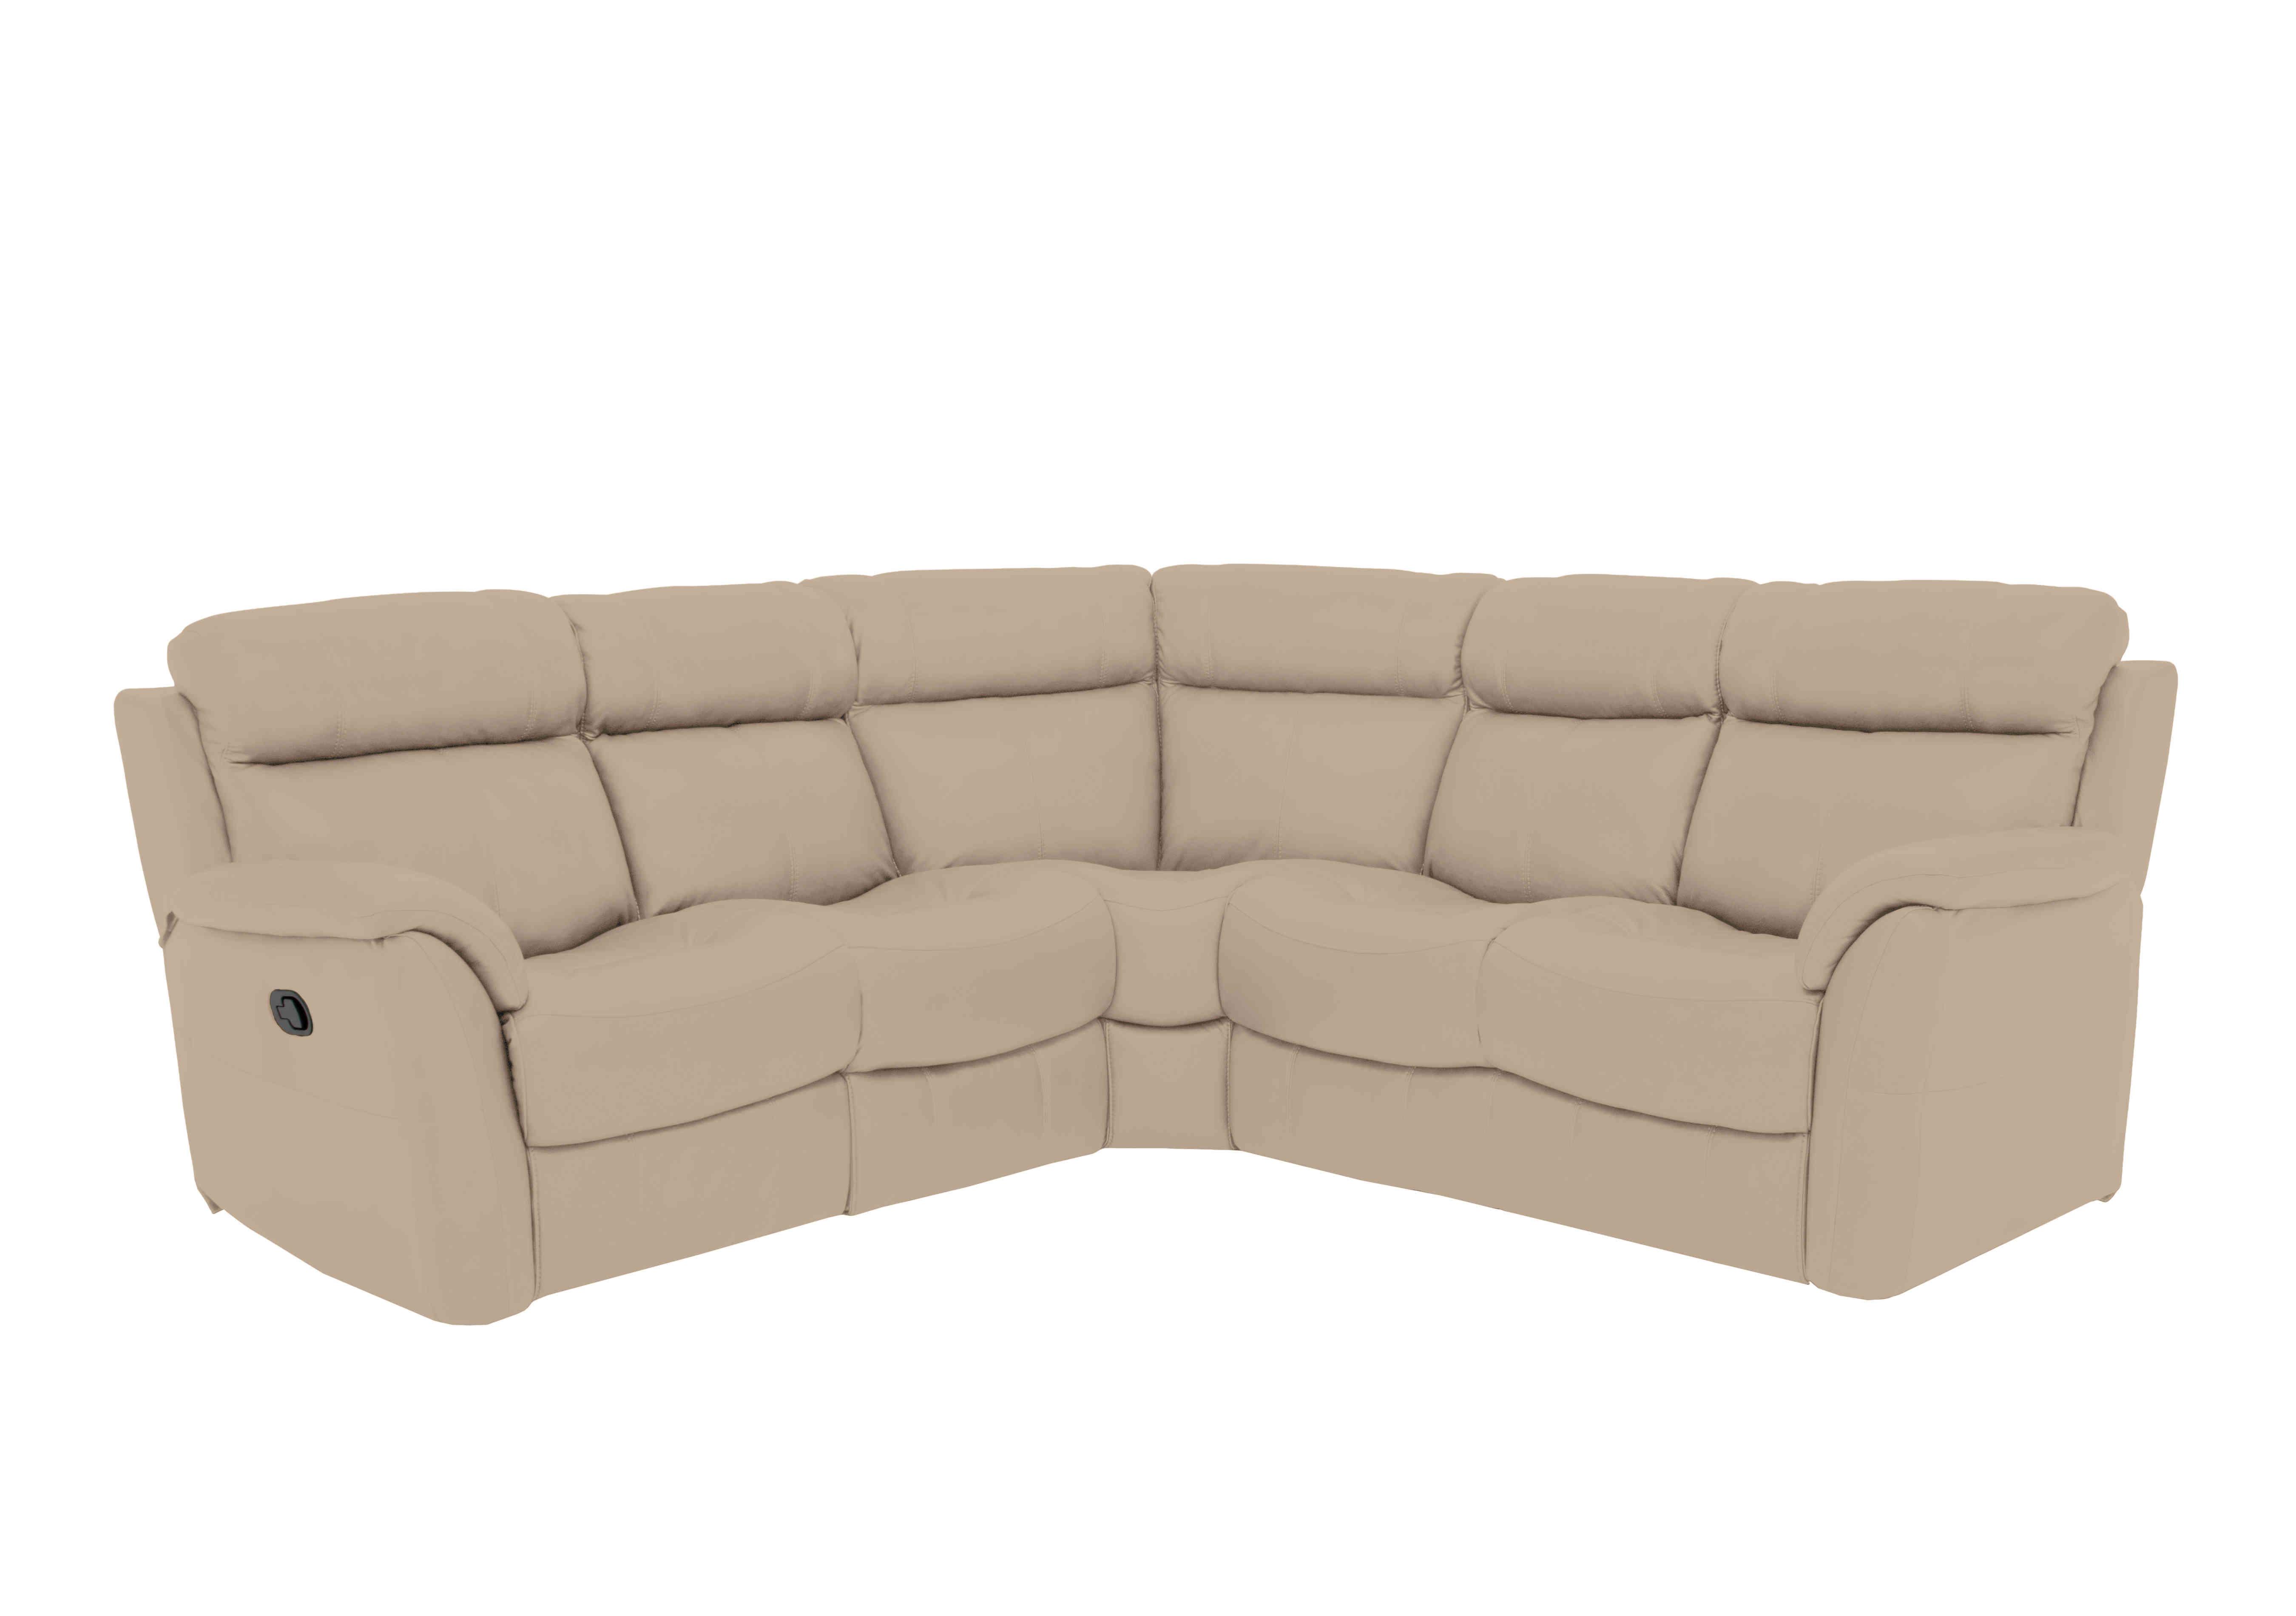 Relax Station Revive Leather Corner Sofa in Bv-039c Pebble on Furniture Village